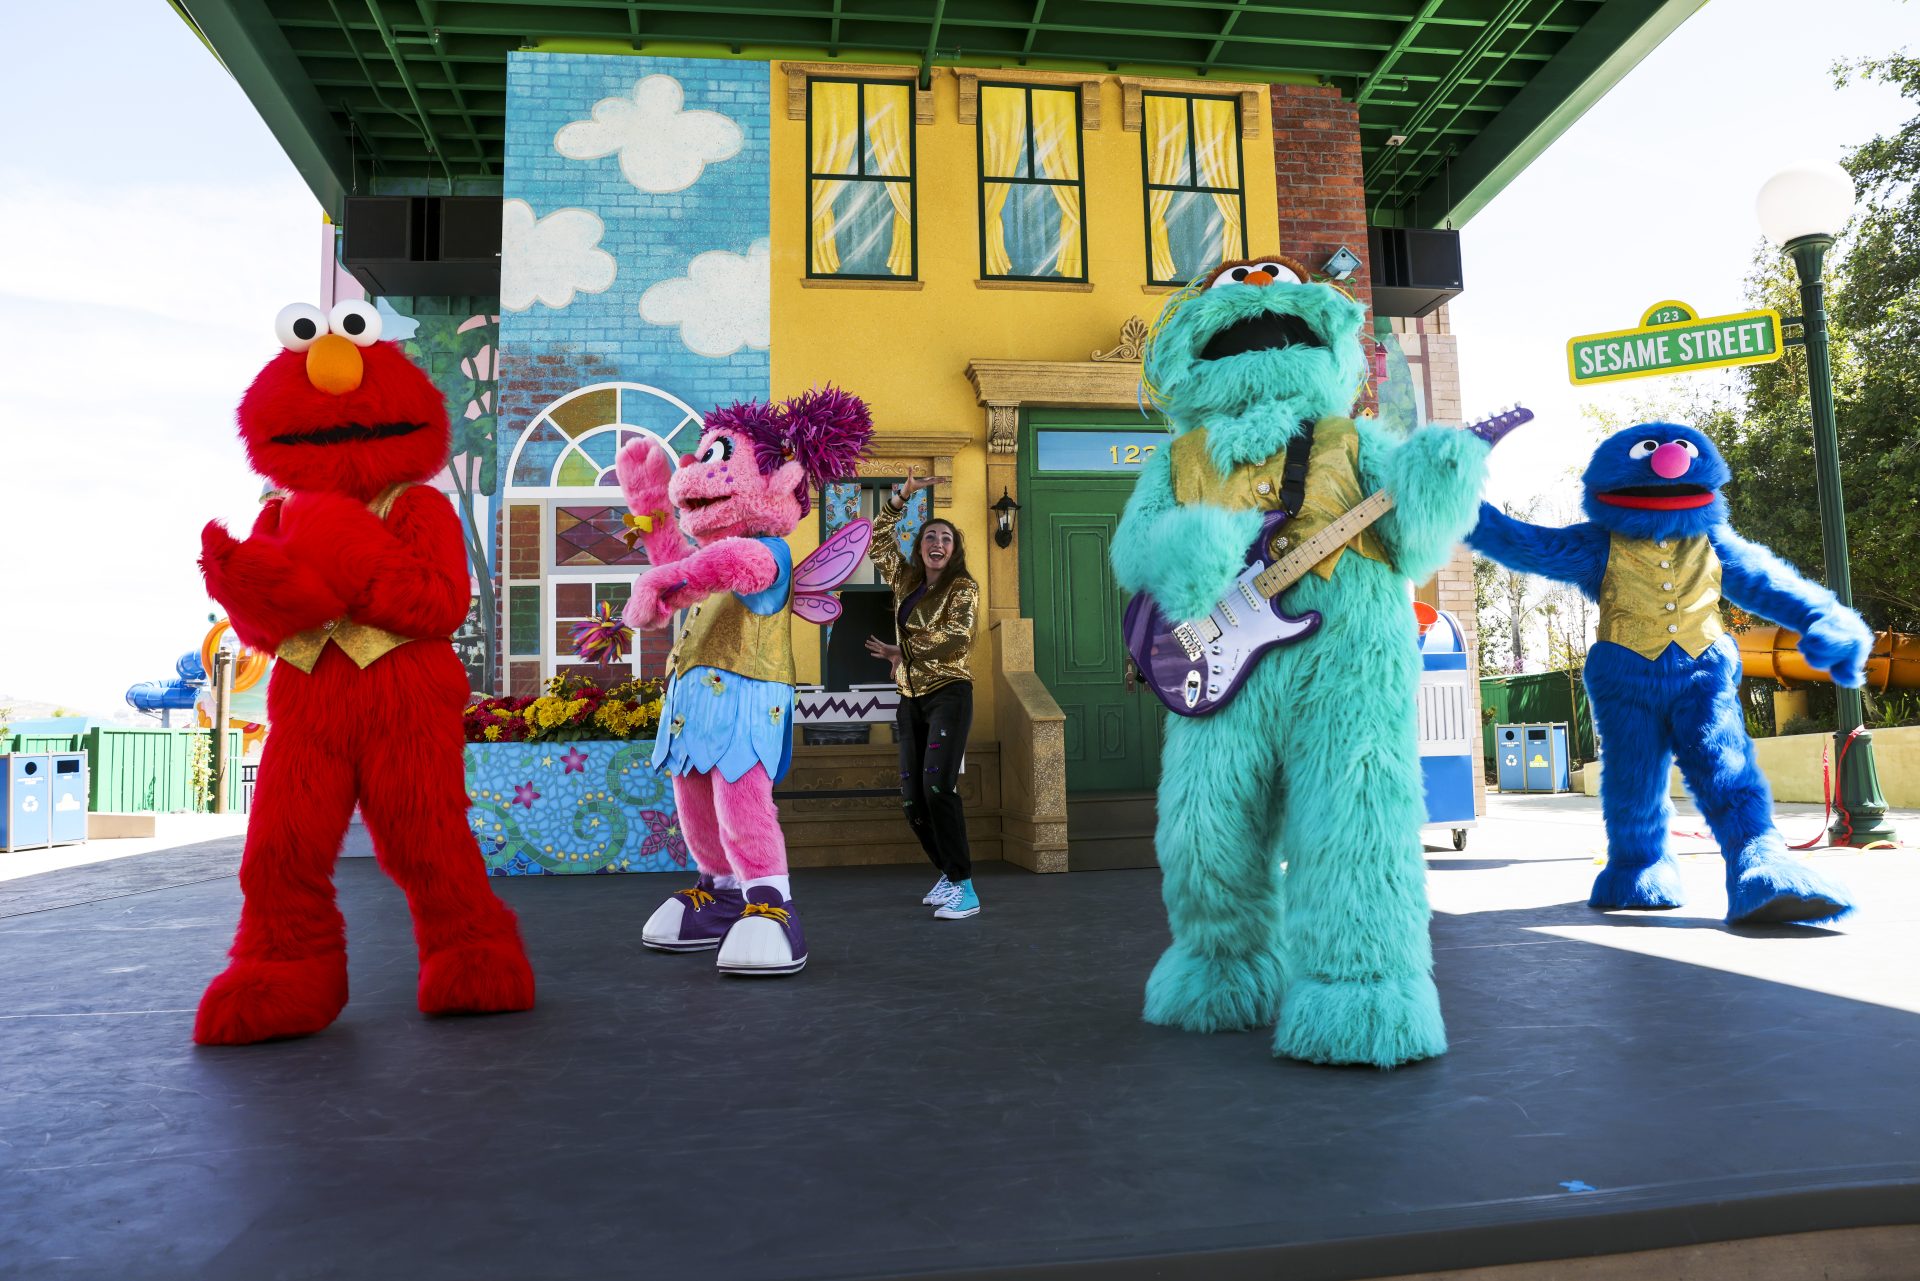 Black Mother Slams Sesame Place After Character Seemingly Ignores Her Daughters At Parade